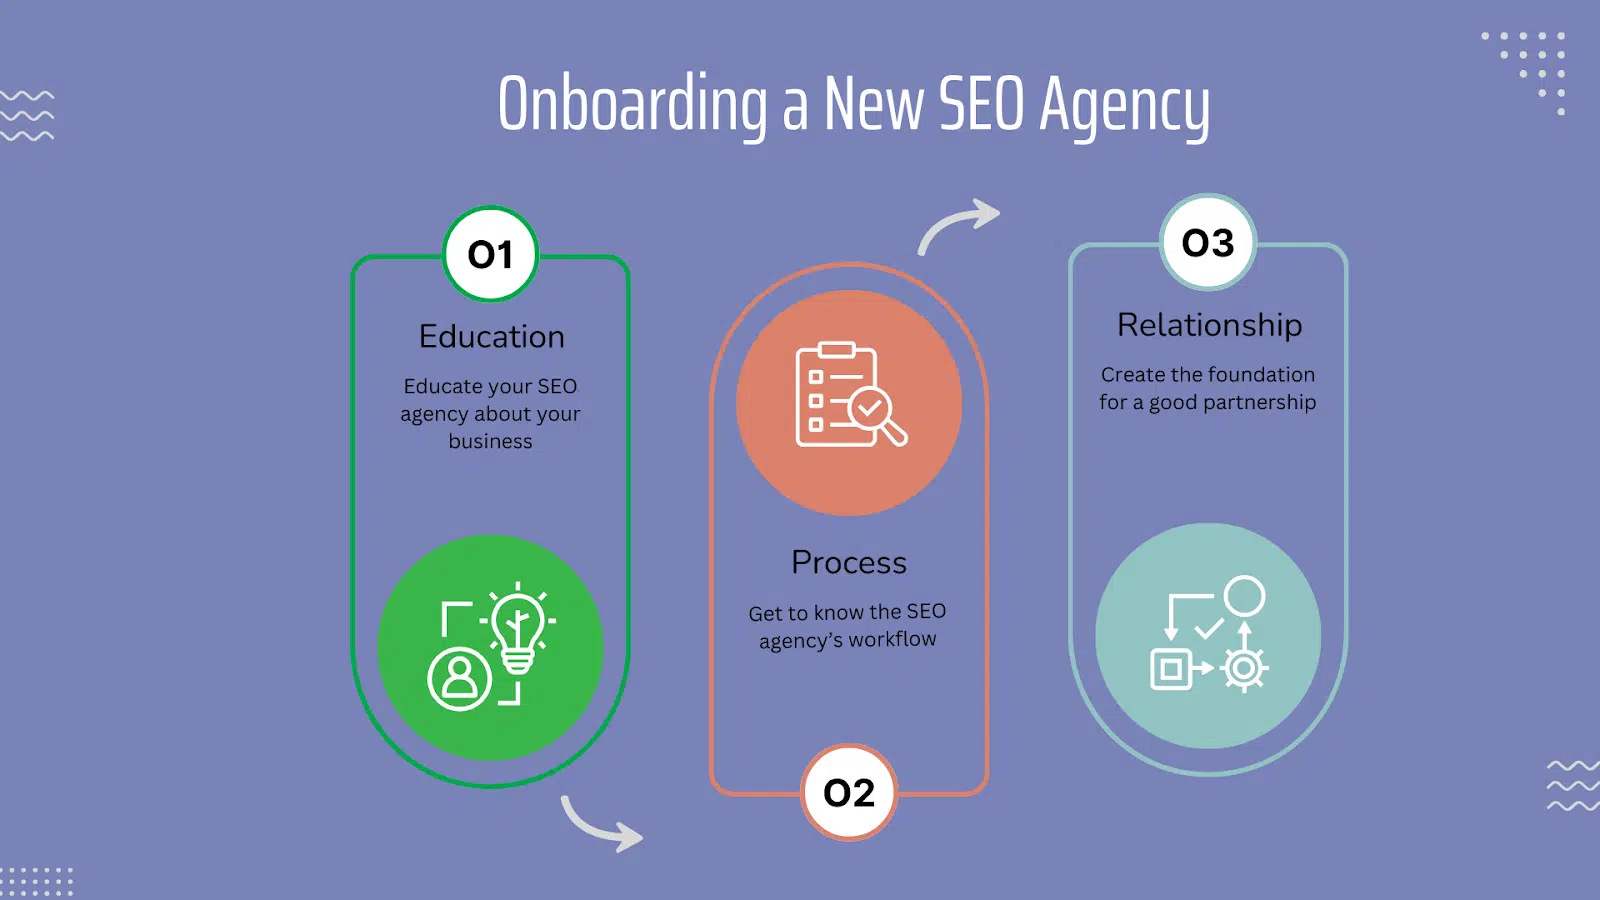 Onboarding a new SEO agency - 3 considerations